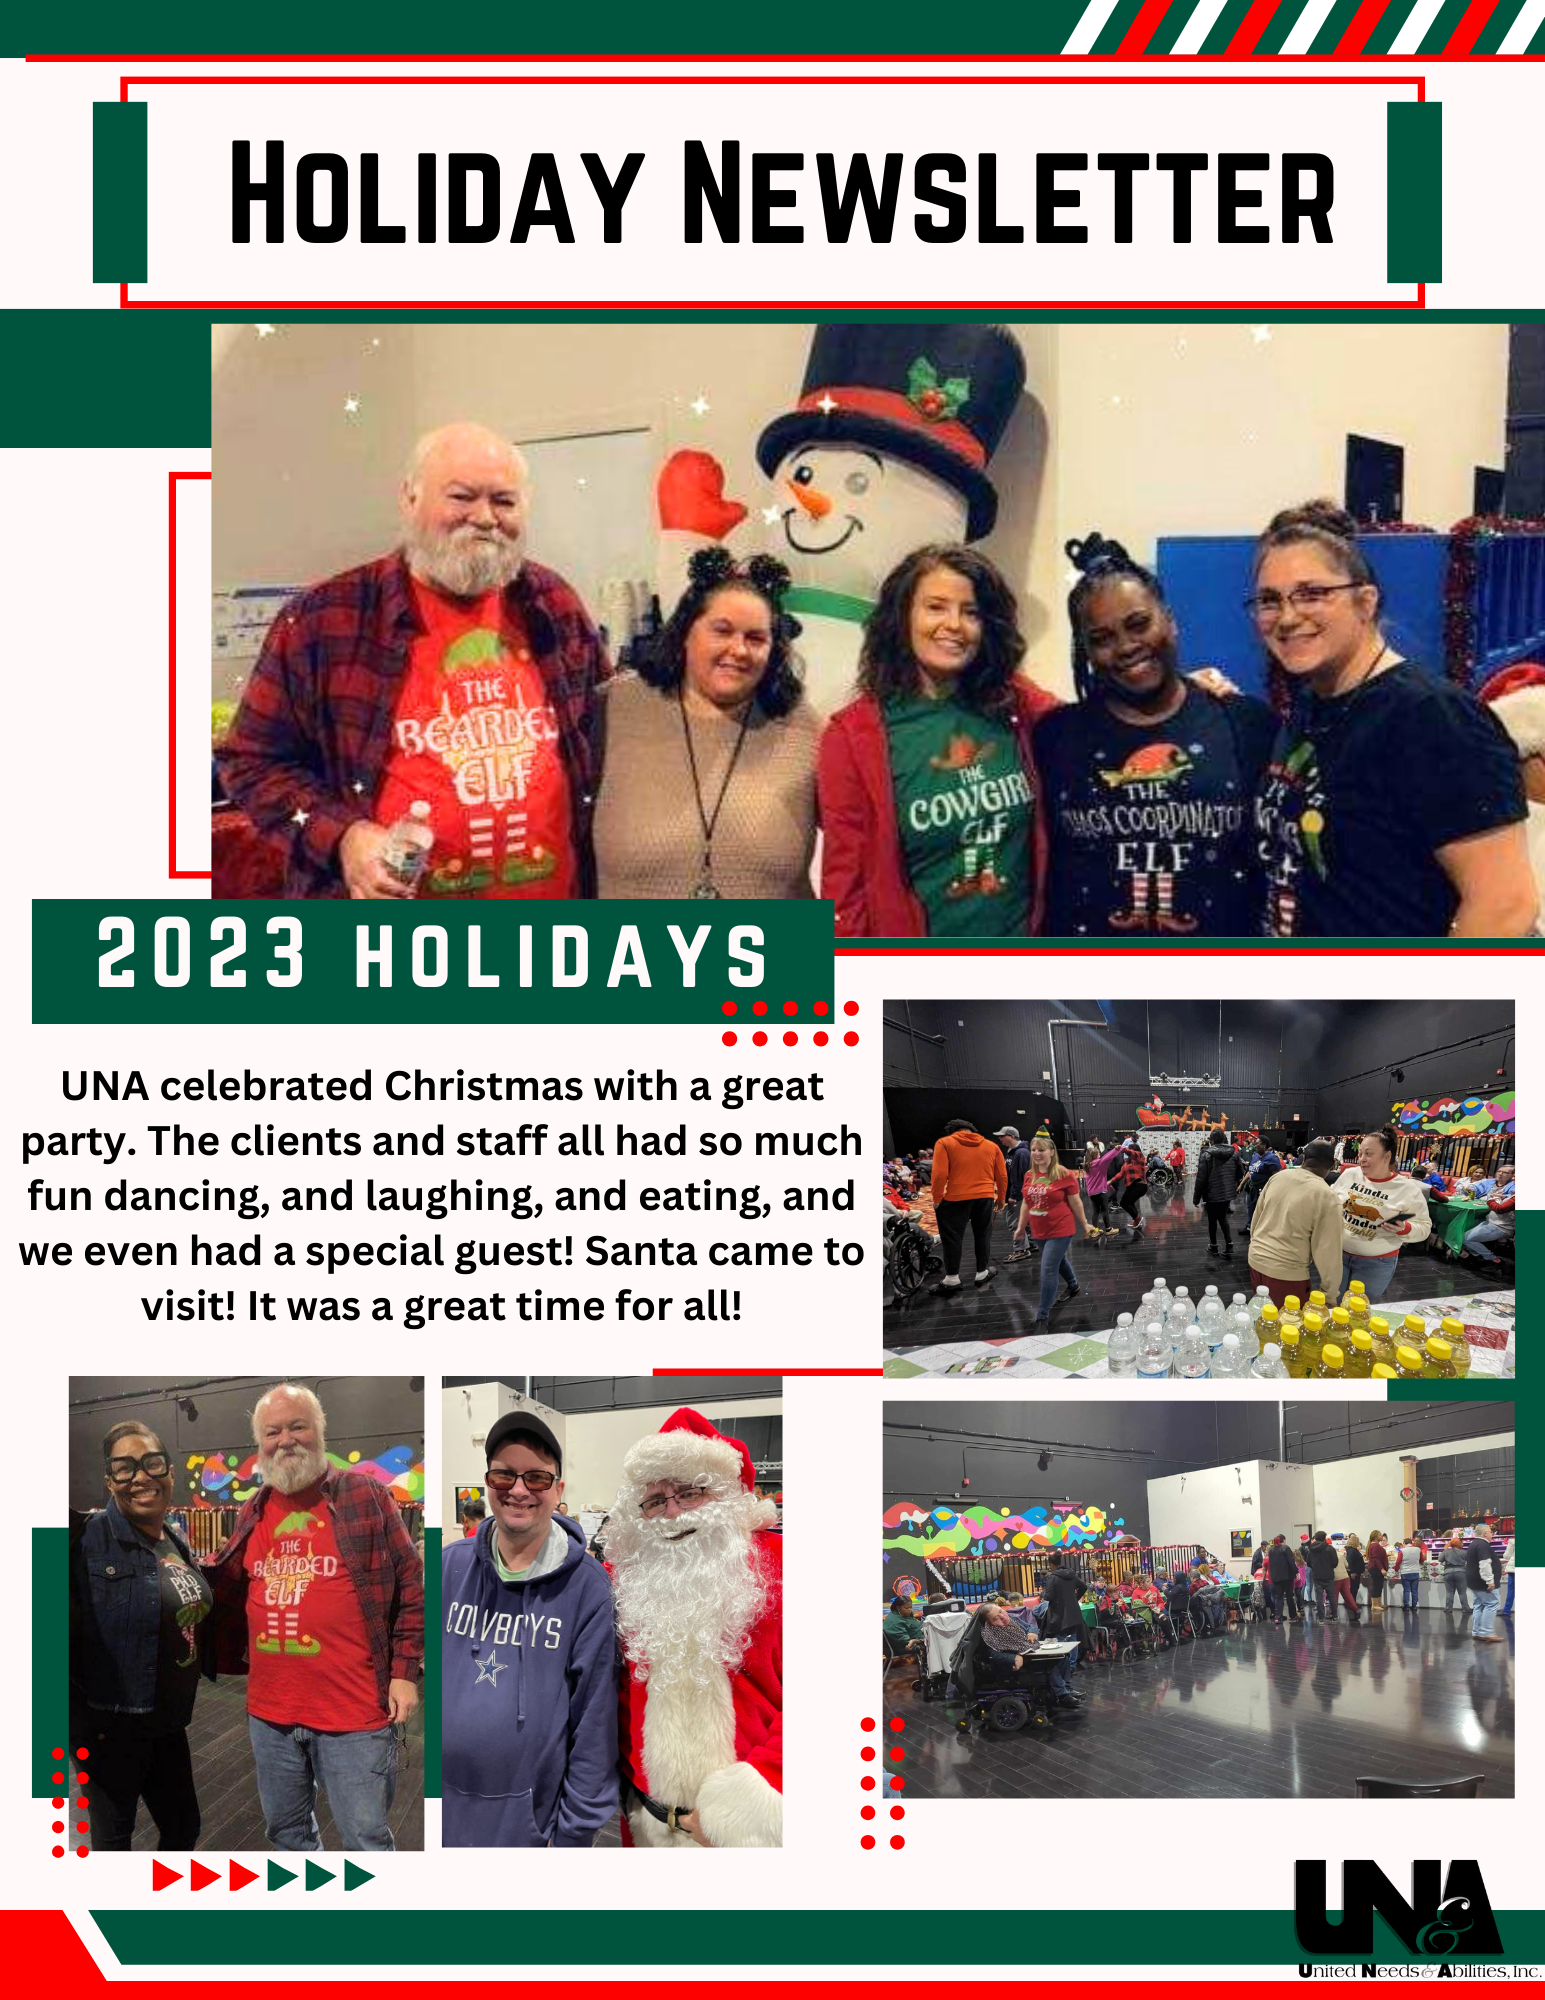 2023's Holiday Newsletter
\